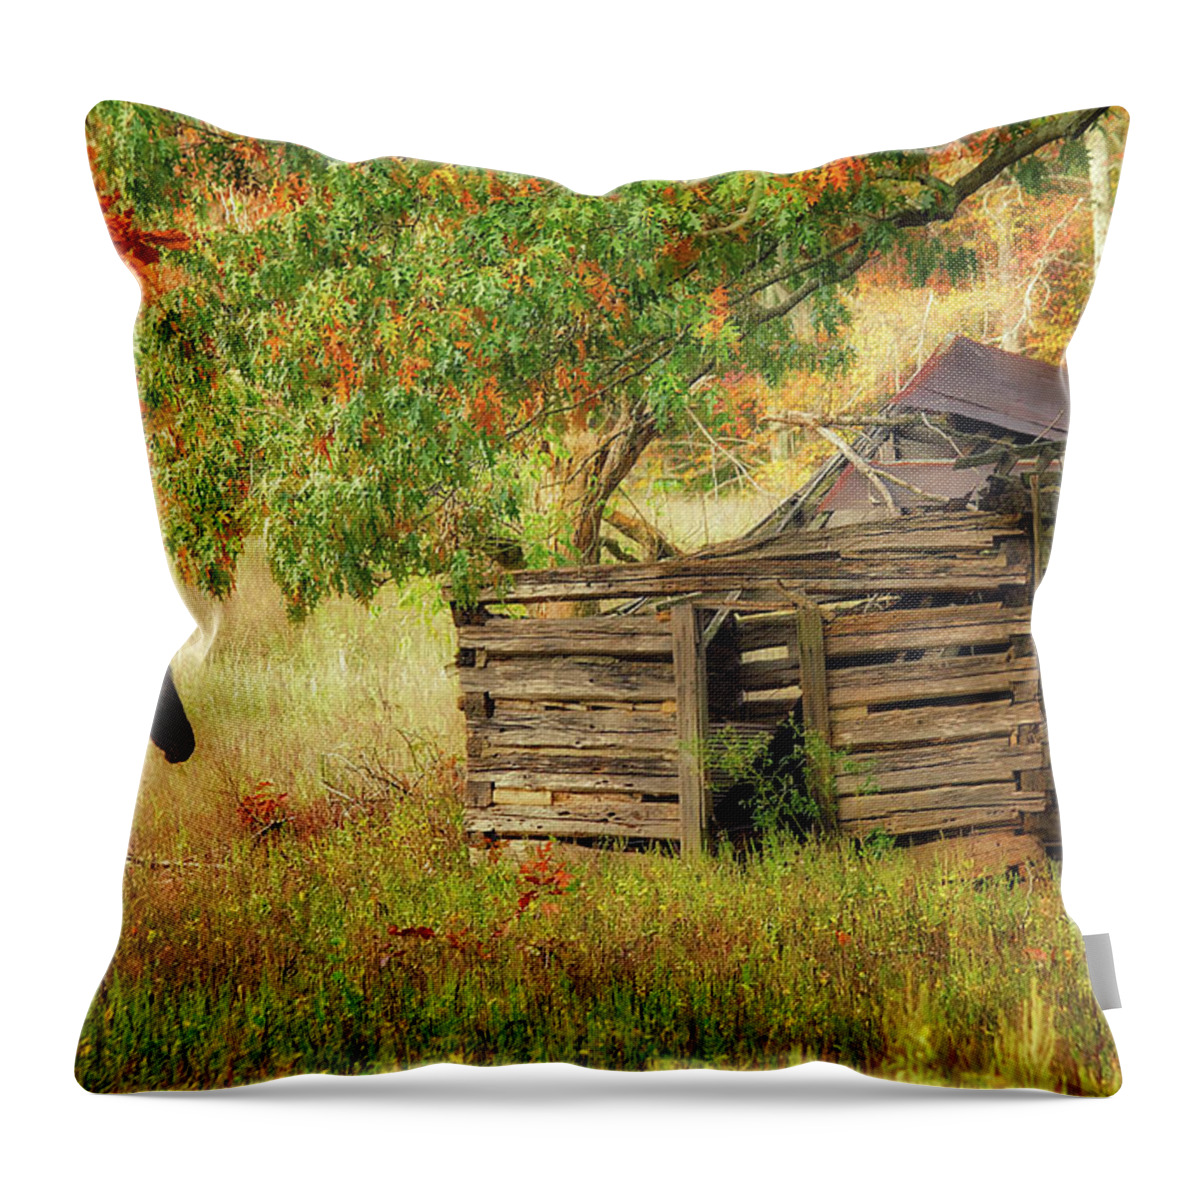 Landscape Throw Pillow featuring the photograph Black Beauty by Amber Kresge